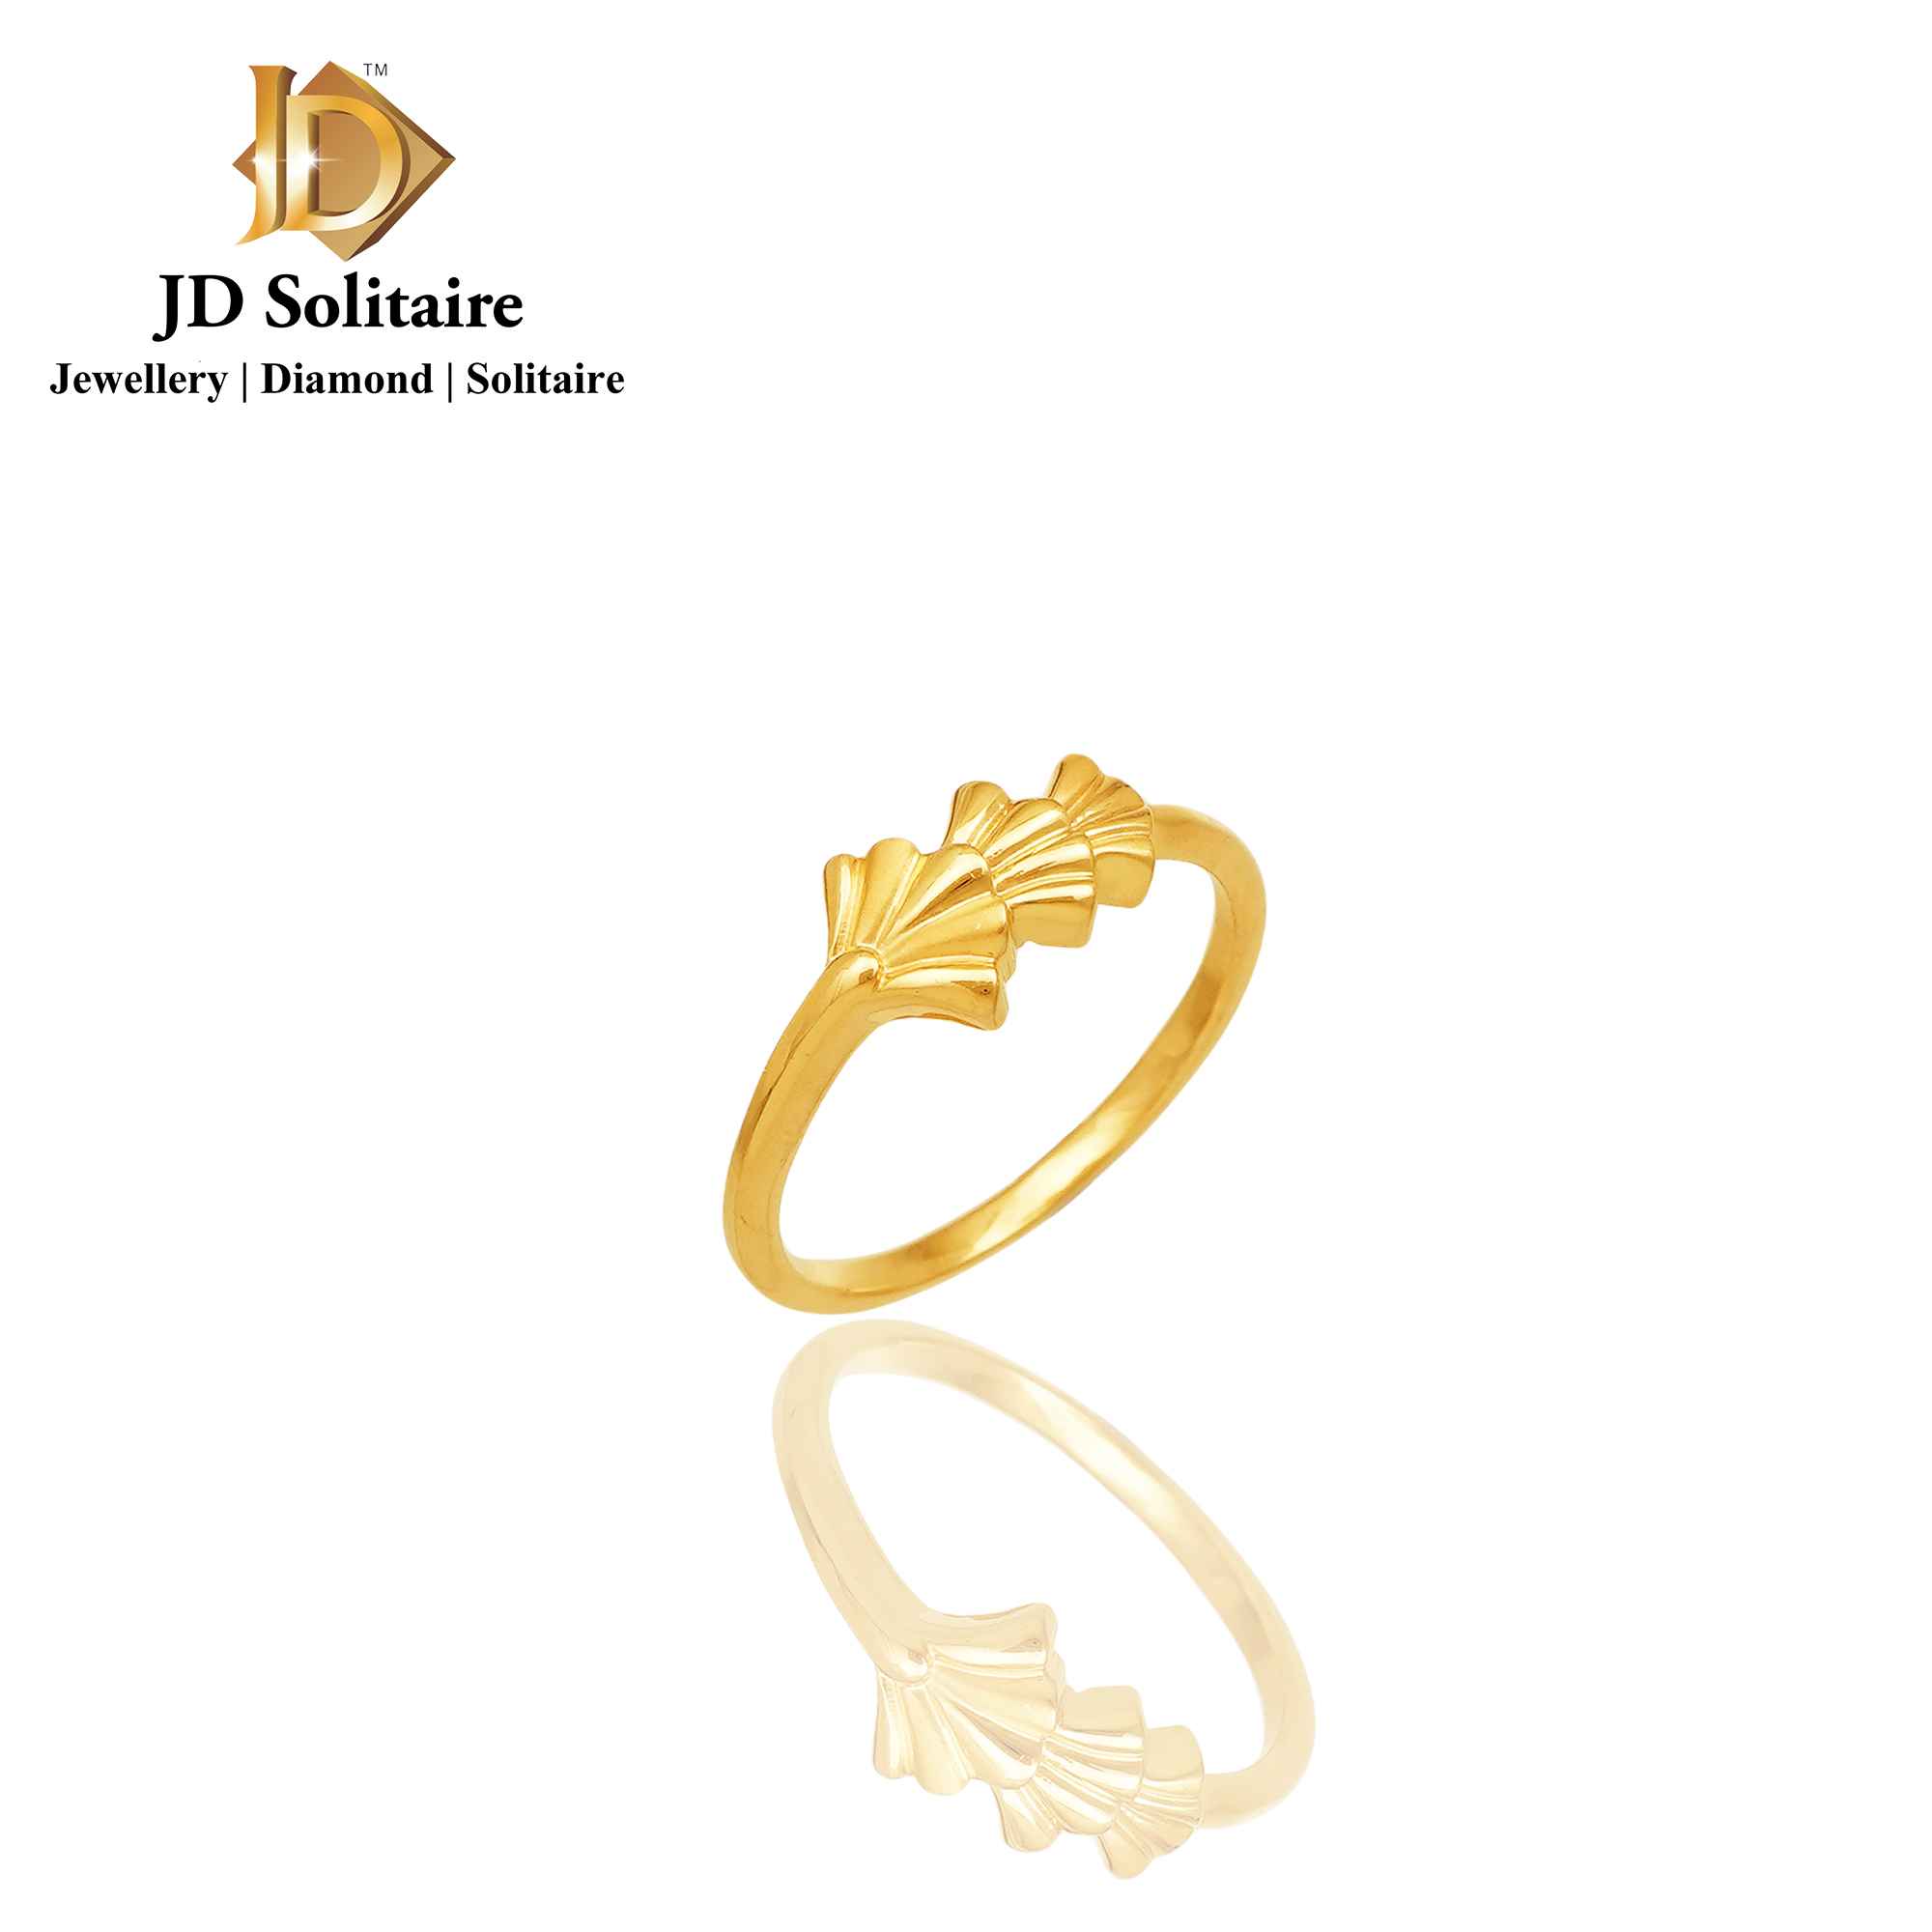 Wedding Bands for Women -Wedding Rings in 22K Gold -Indian Gold Jewelry  -Buy Online